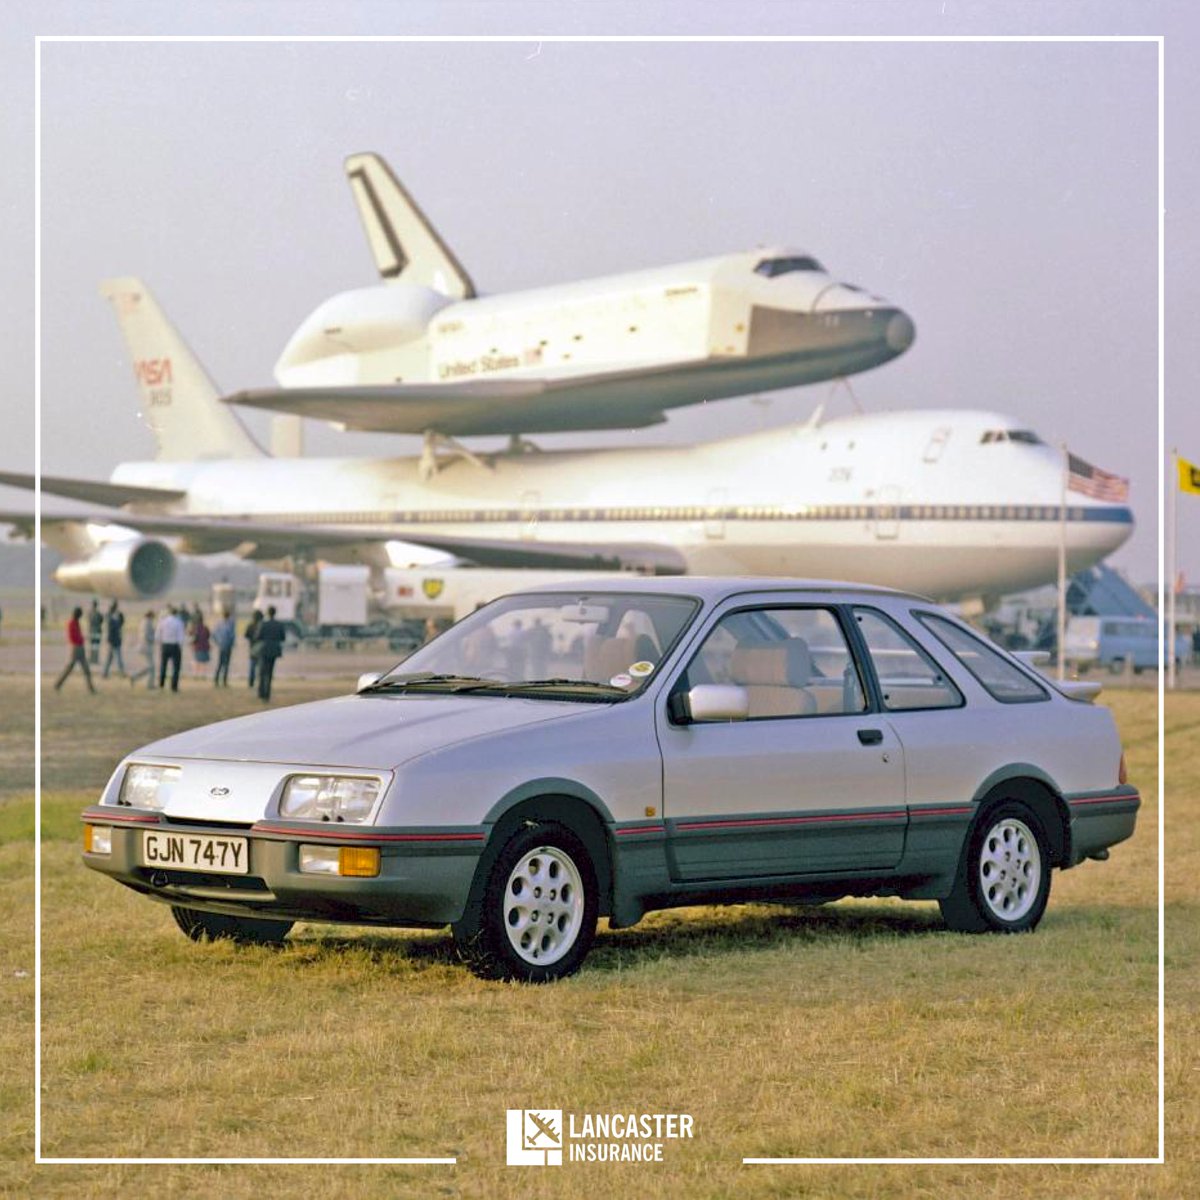 Today in 1961, Yuri Gagarin made the first human space flight, an historic event that opened the way for space exploration.

#InternationalDayOfHumanSpaceFlight #NASA #HumanSpaceFlightDay #FordSierra